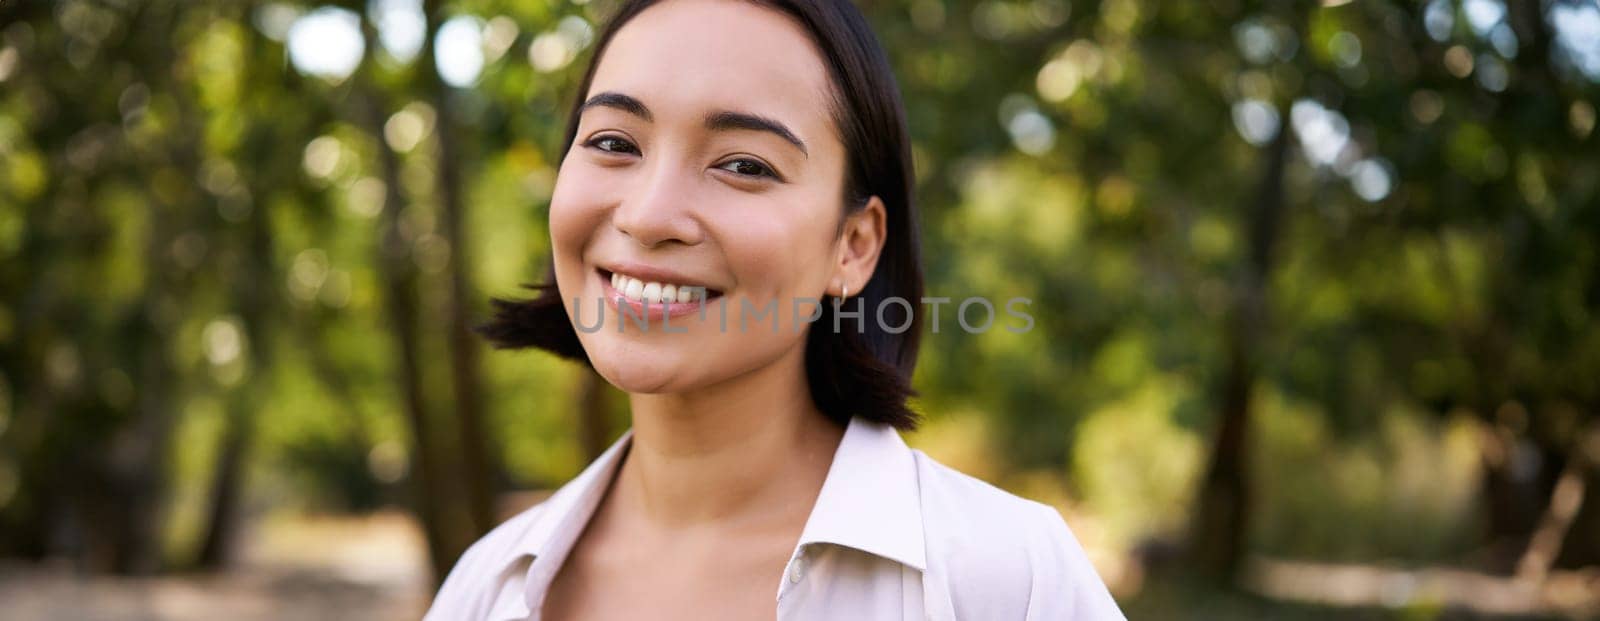 People concept. Smiling asian girl looking at camera with happy, joyful emotion, posing in green park on a warm summer day.